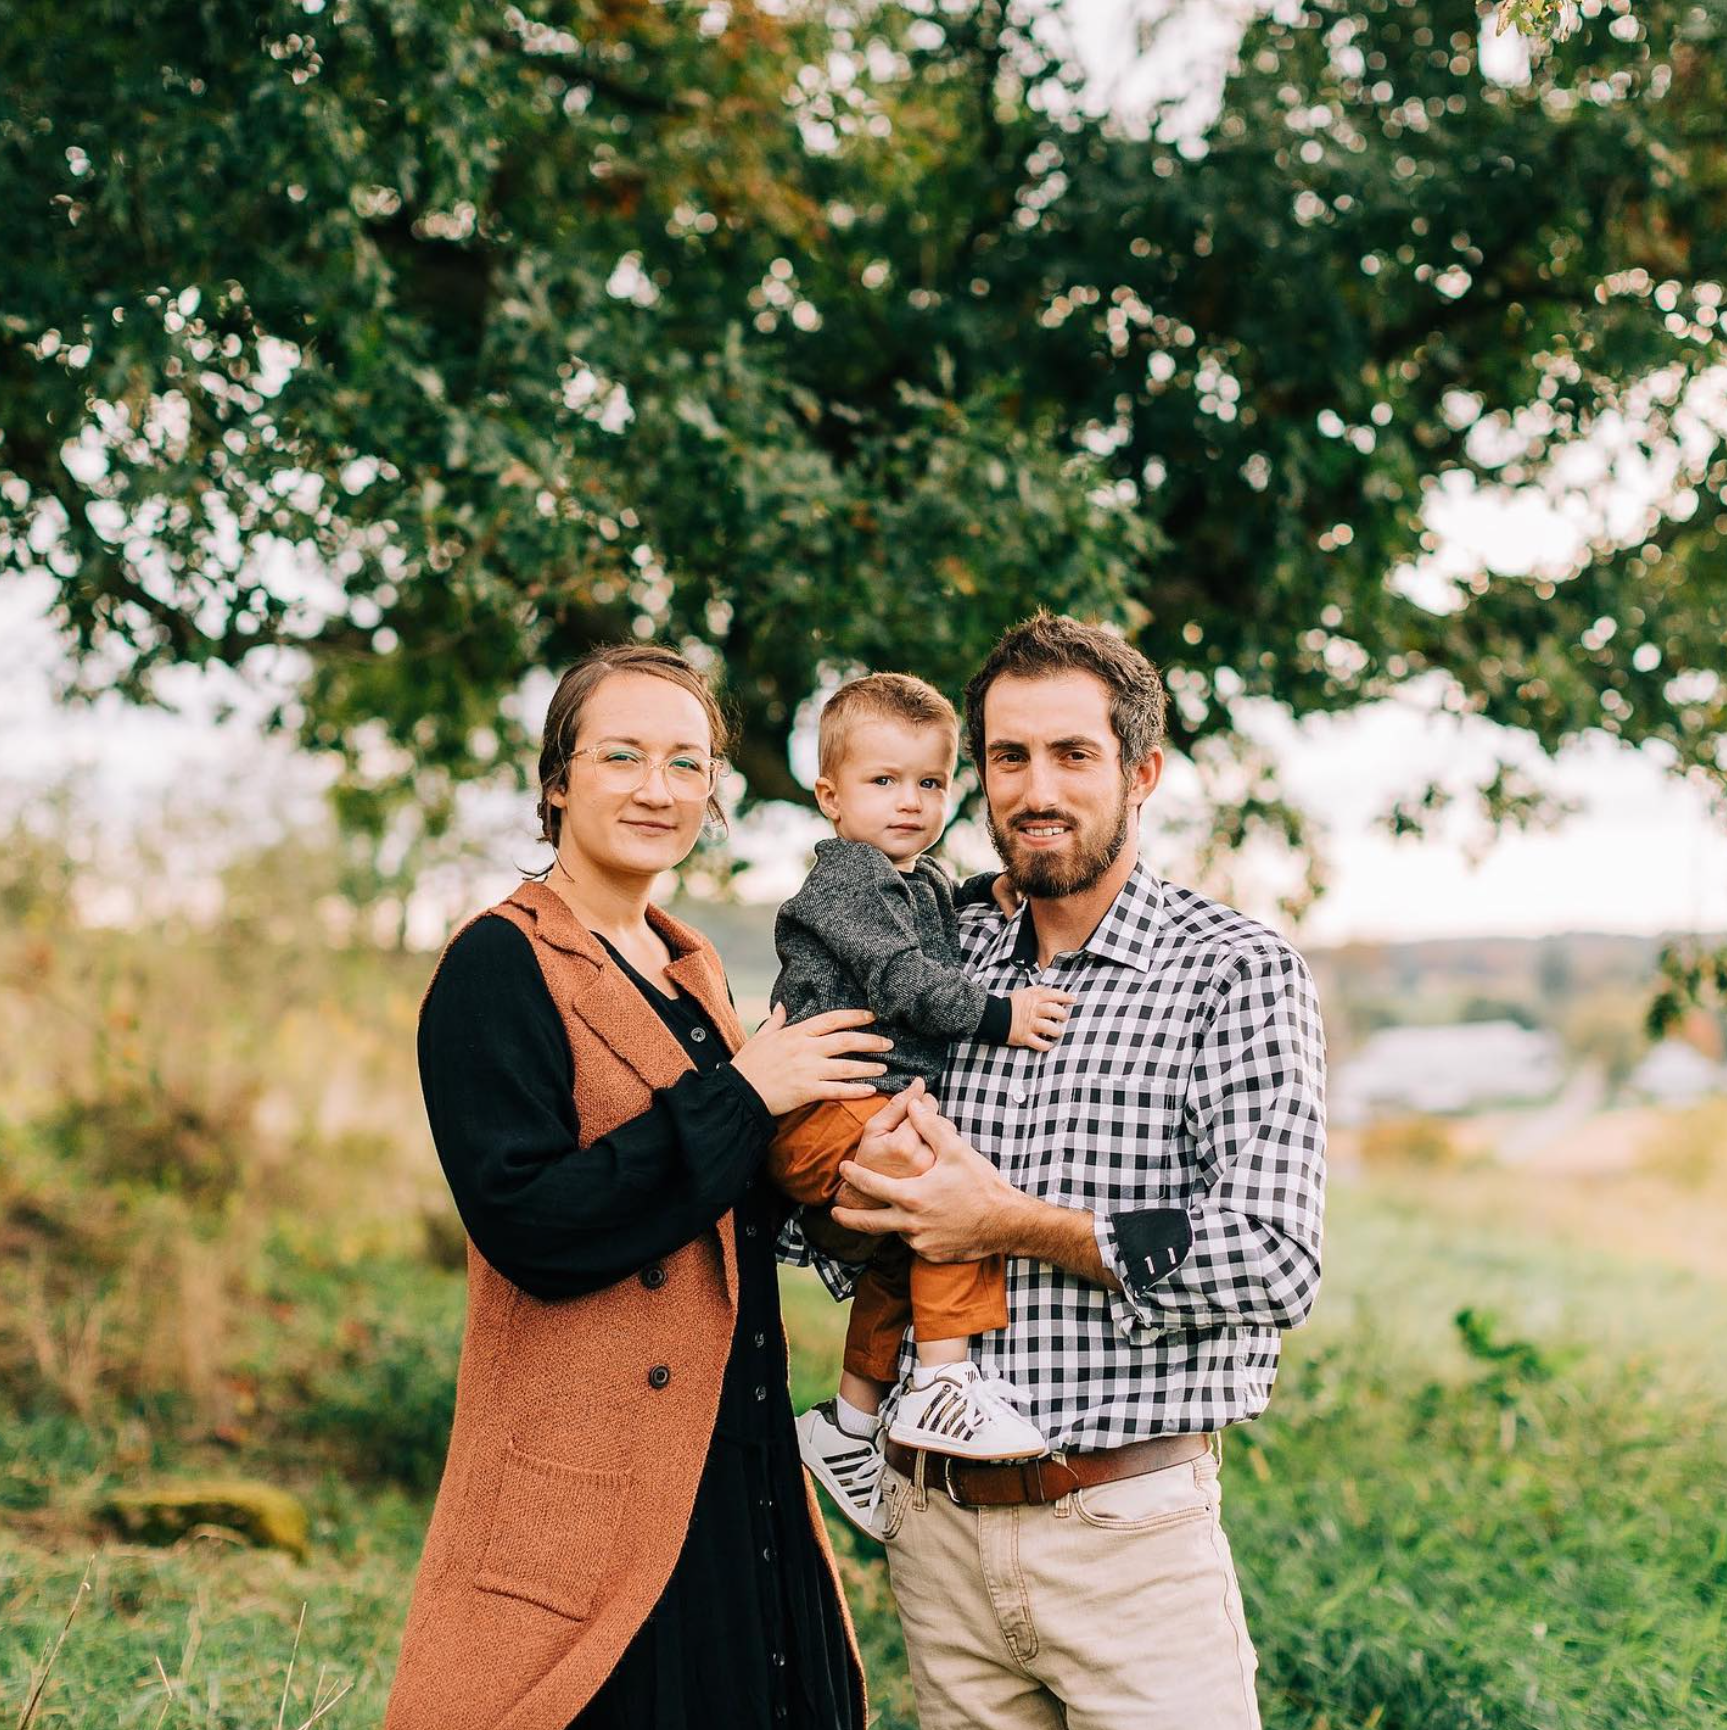 Father and mother holding their baby in a family photo with an outdoor setting with